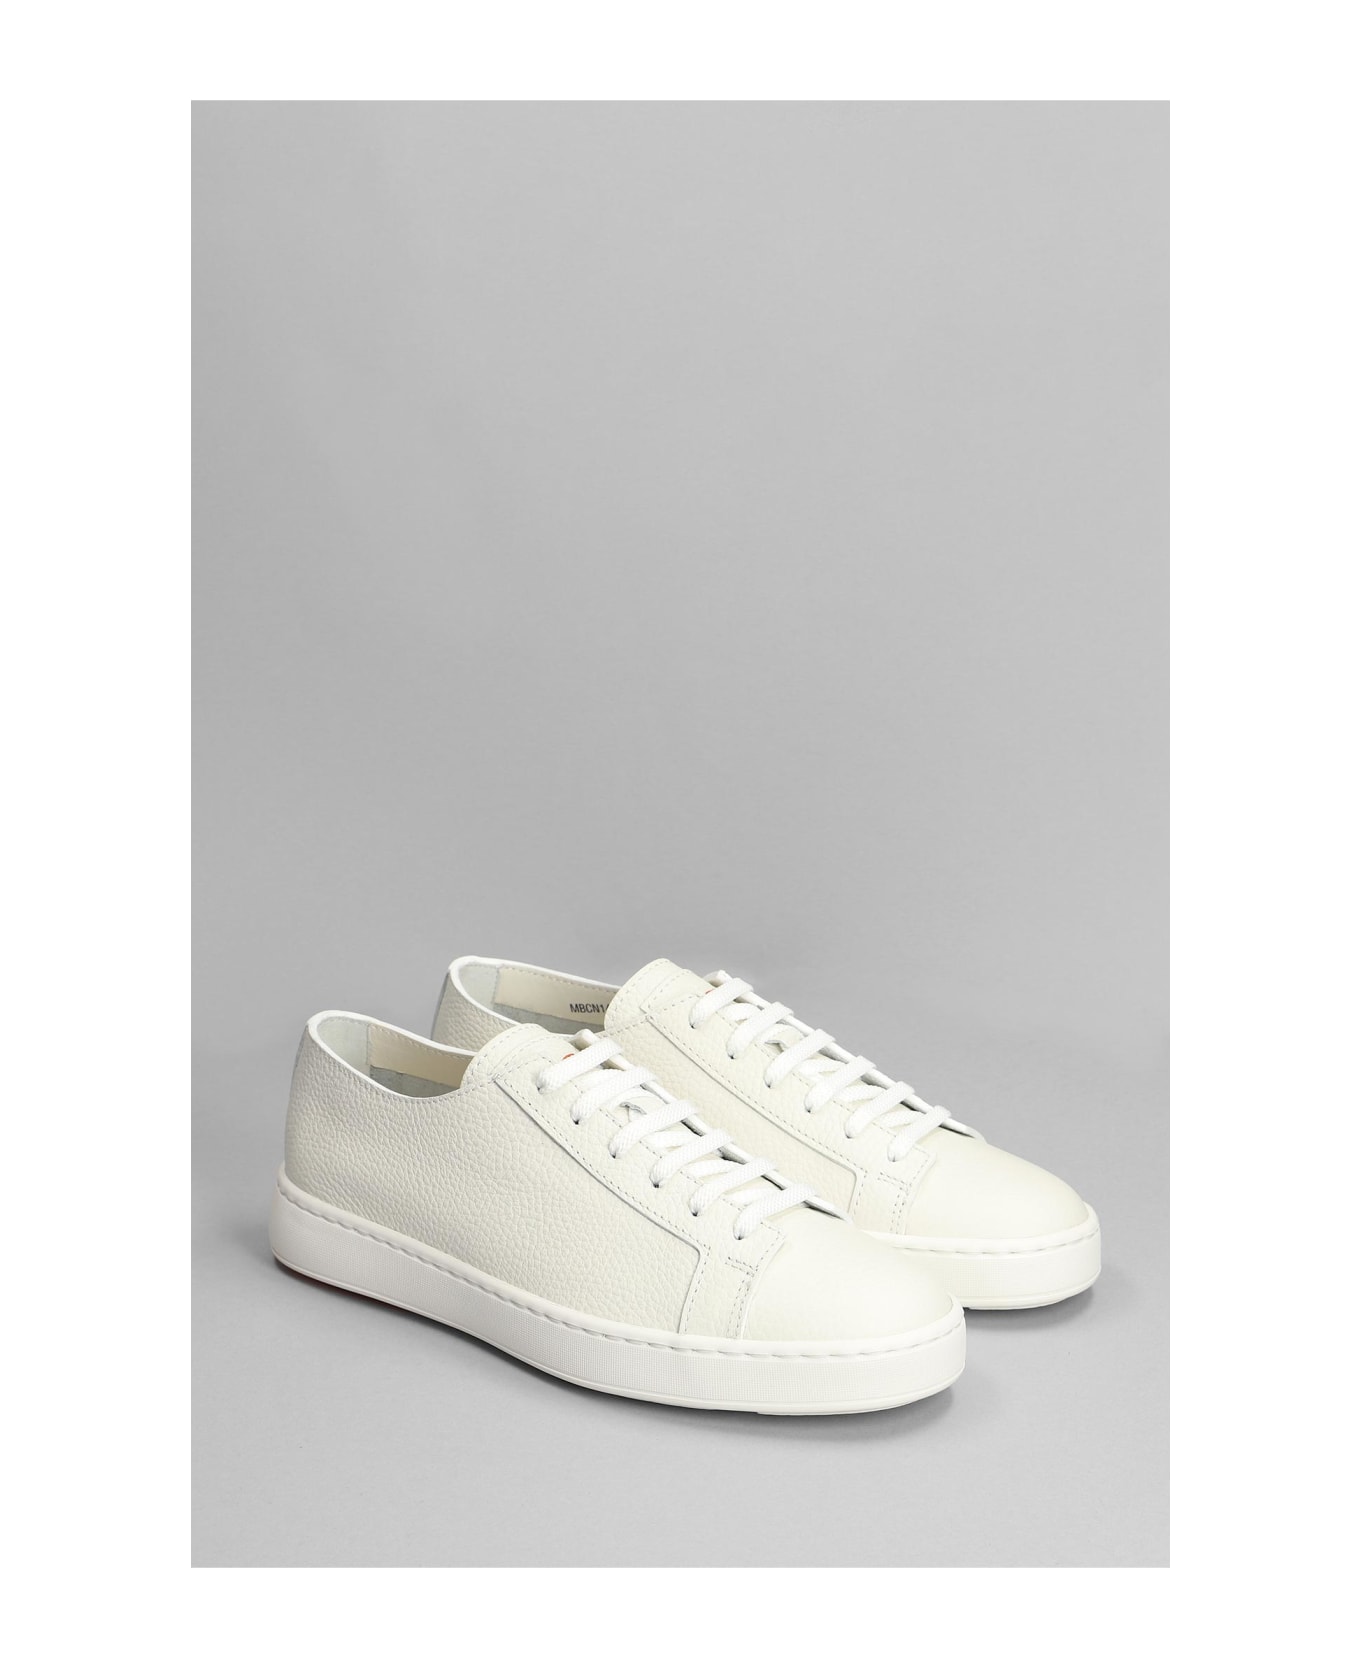 Santoni Cleanic Sneakers In White xclab - white